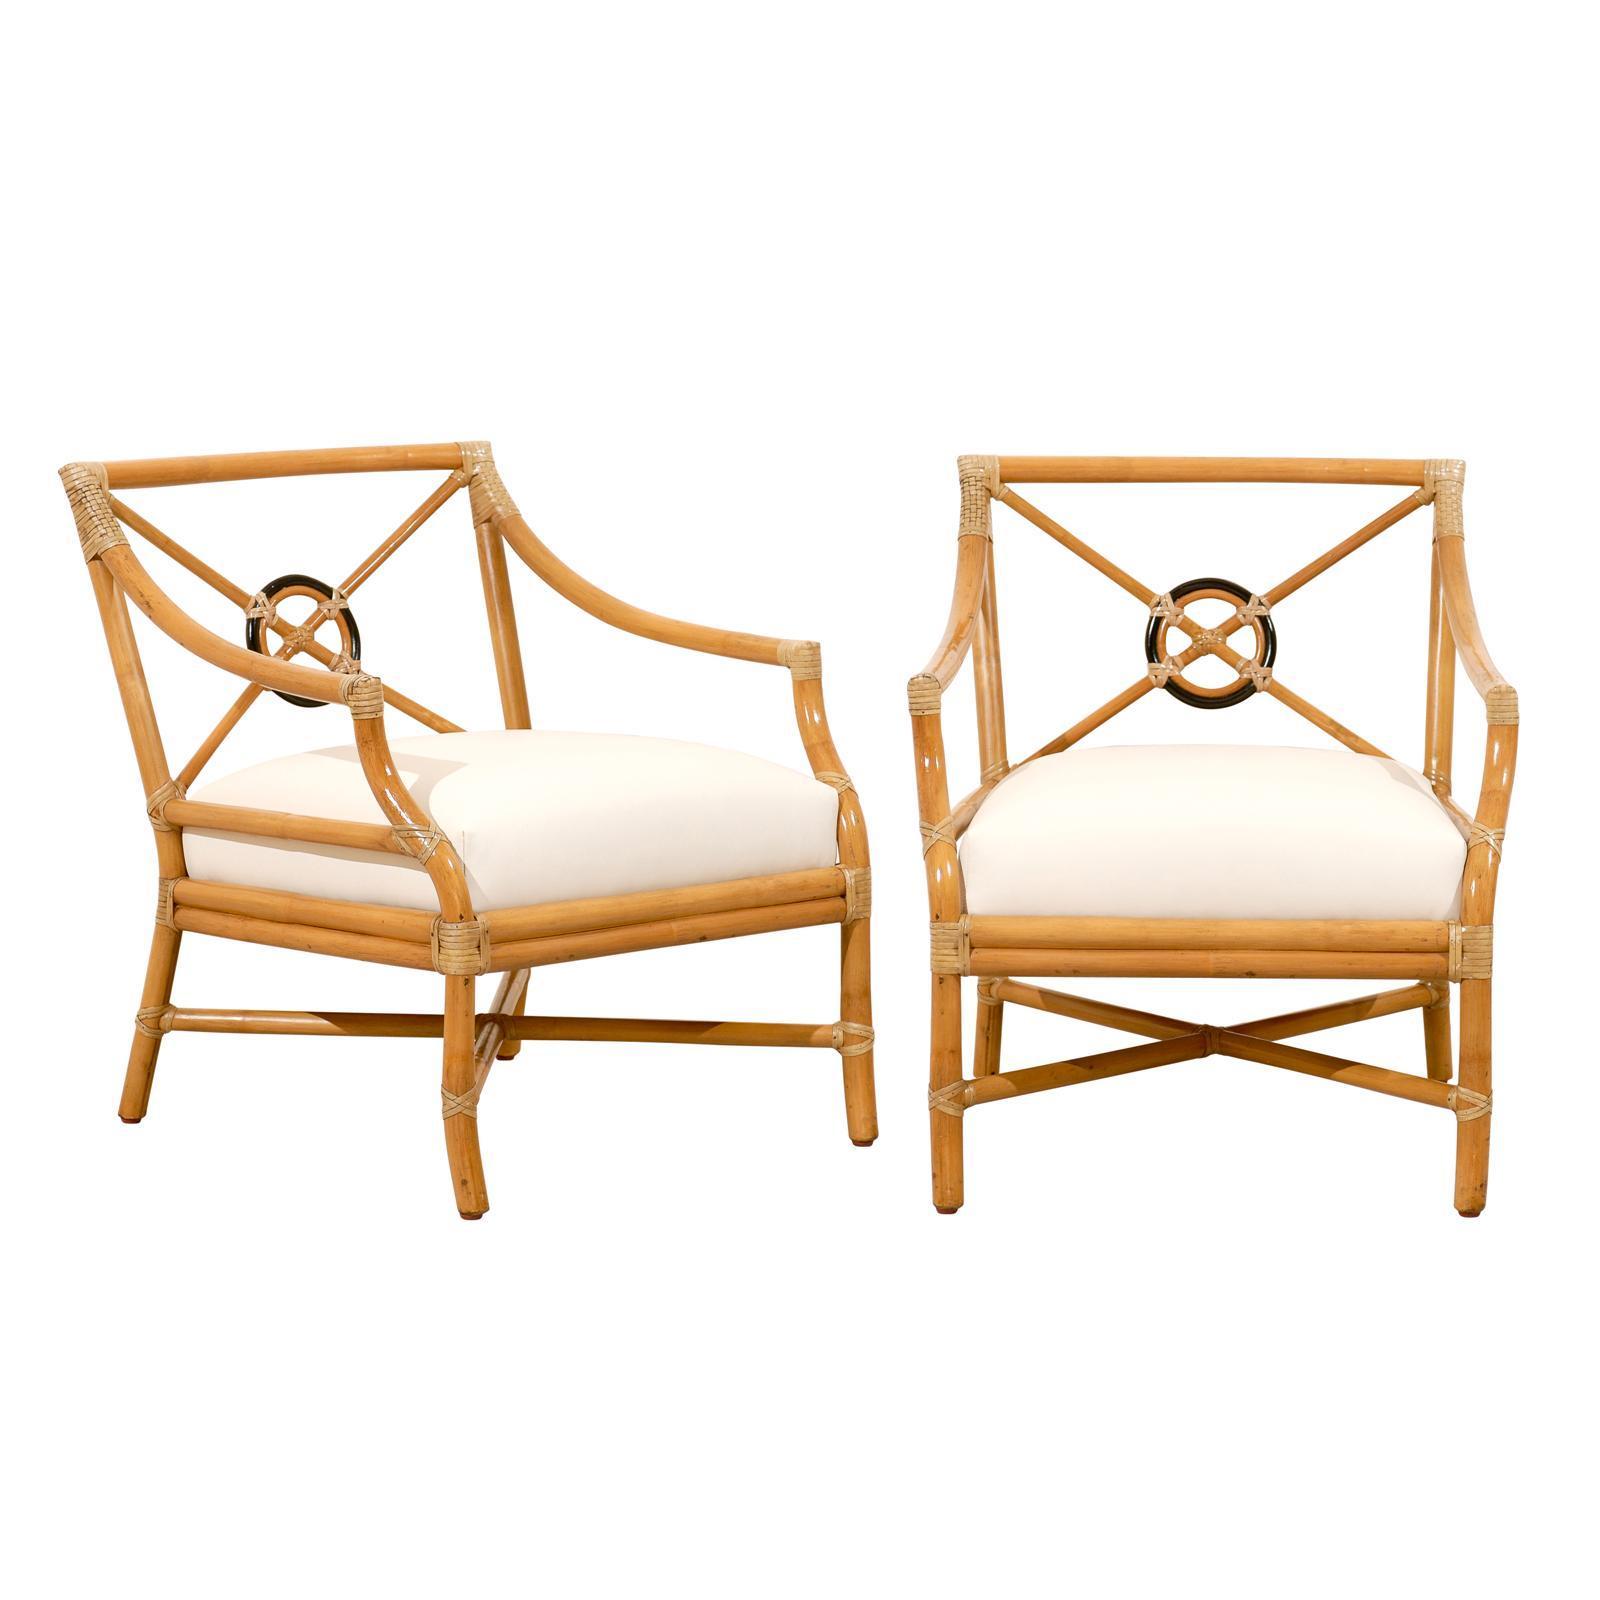 Beautiful Pair of Vintage Bamboo Target Back Lounge Chairs by McGuire